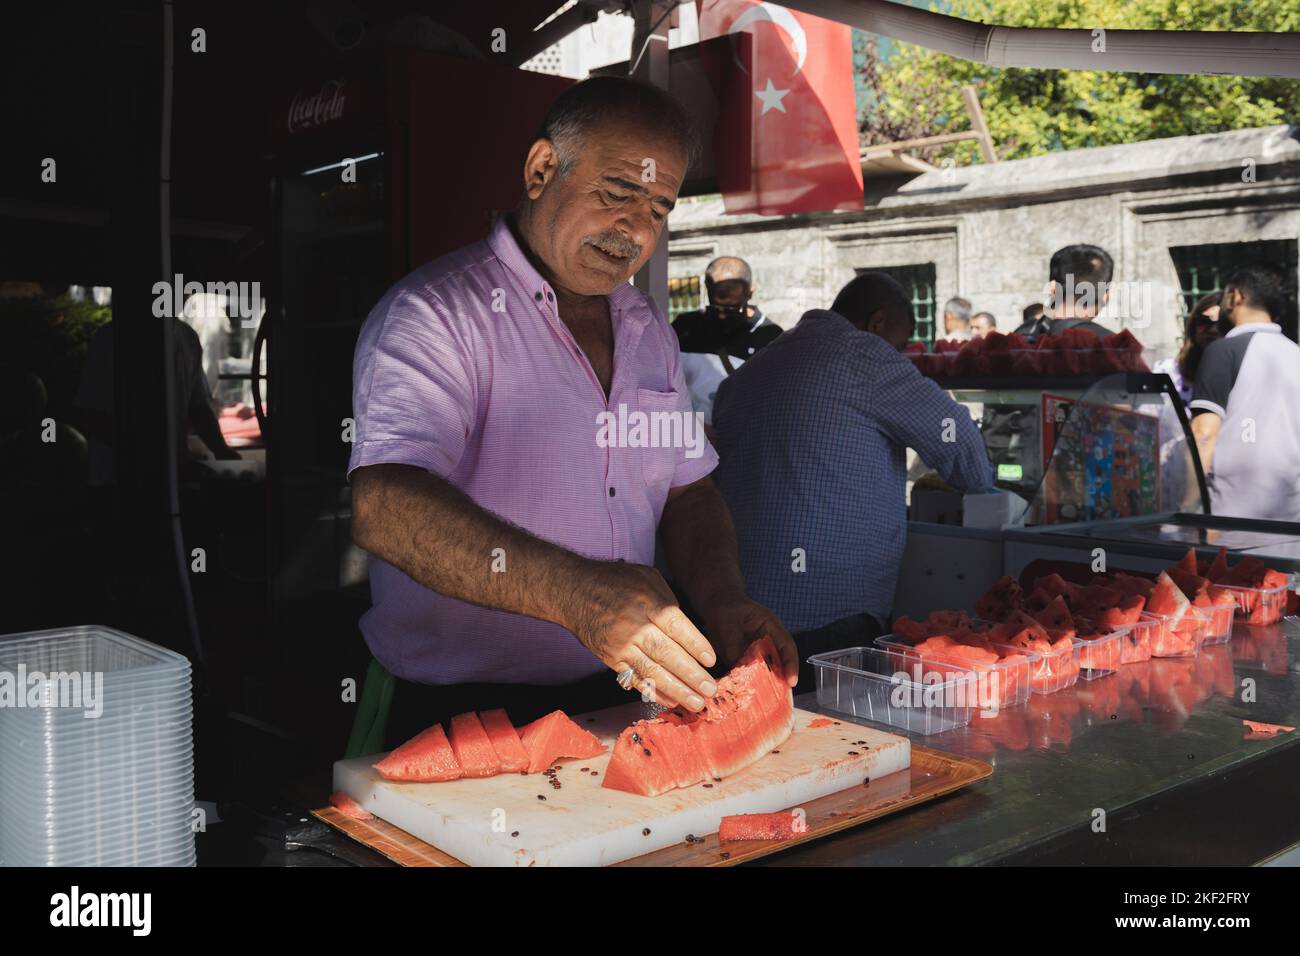 Istanbul, Turkey - October 1 2022: A traditional Turkish street vendor in the tourist district of Sultanahmet sells large watermelons out of a food st Stock Photo